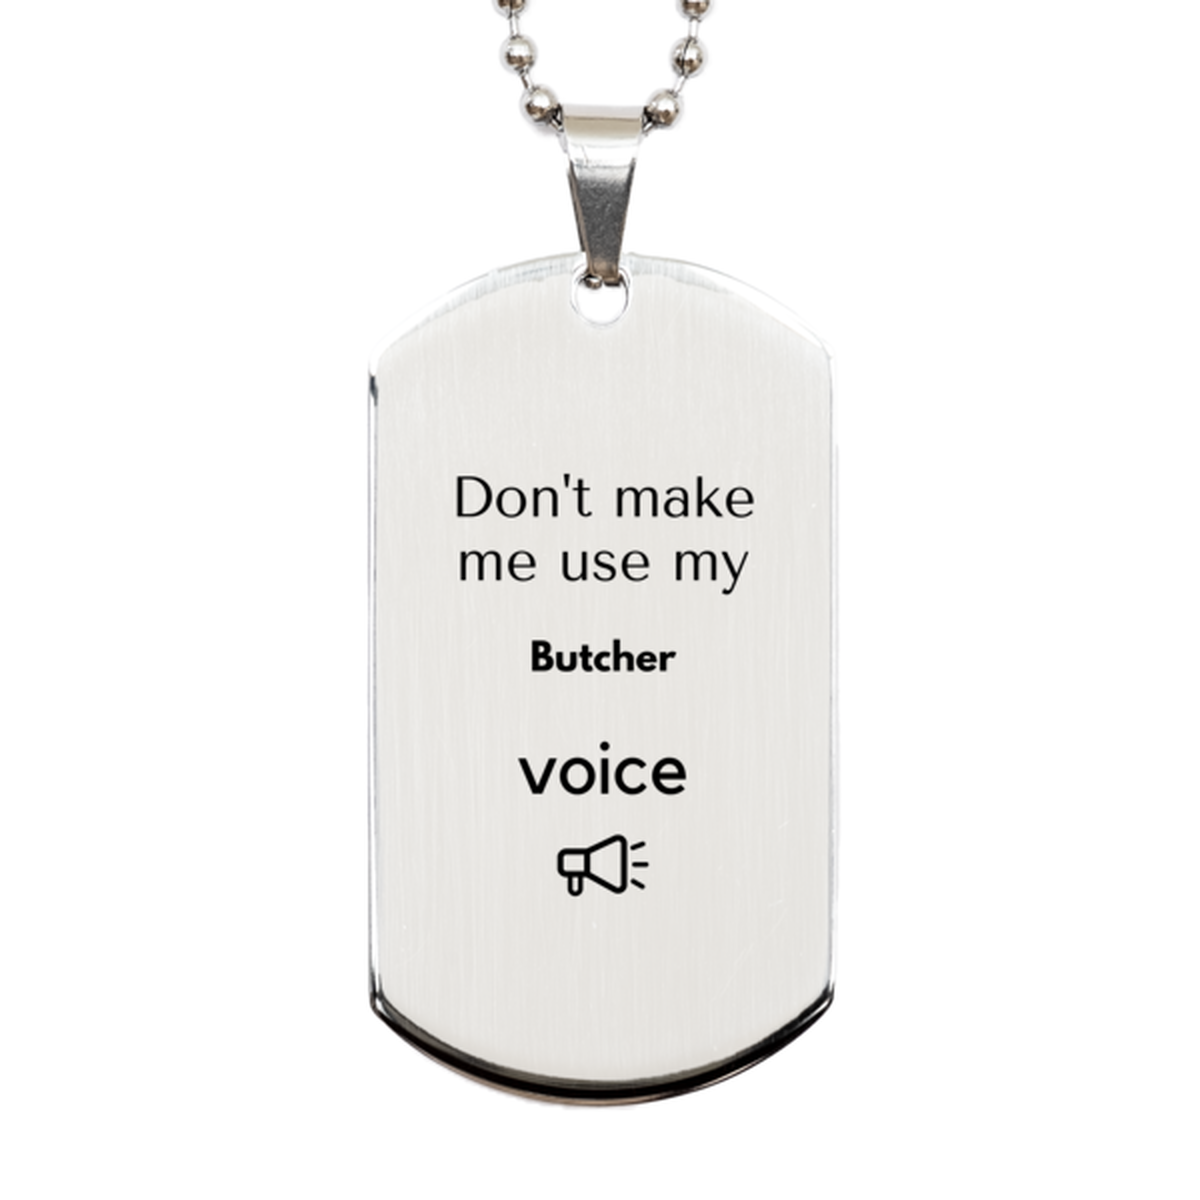 Don't make me use my Butcher voice, Sarcasm Butcher Gifts, Christmas Butcher Silver Dog Tag Birthday Unique Gifts For Butcher Coworkers, Men, Women, Colleague, Friends